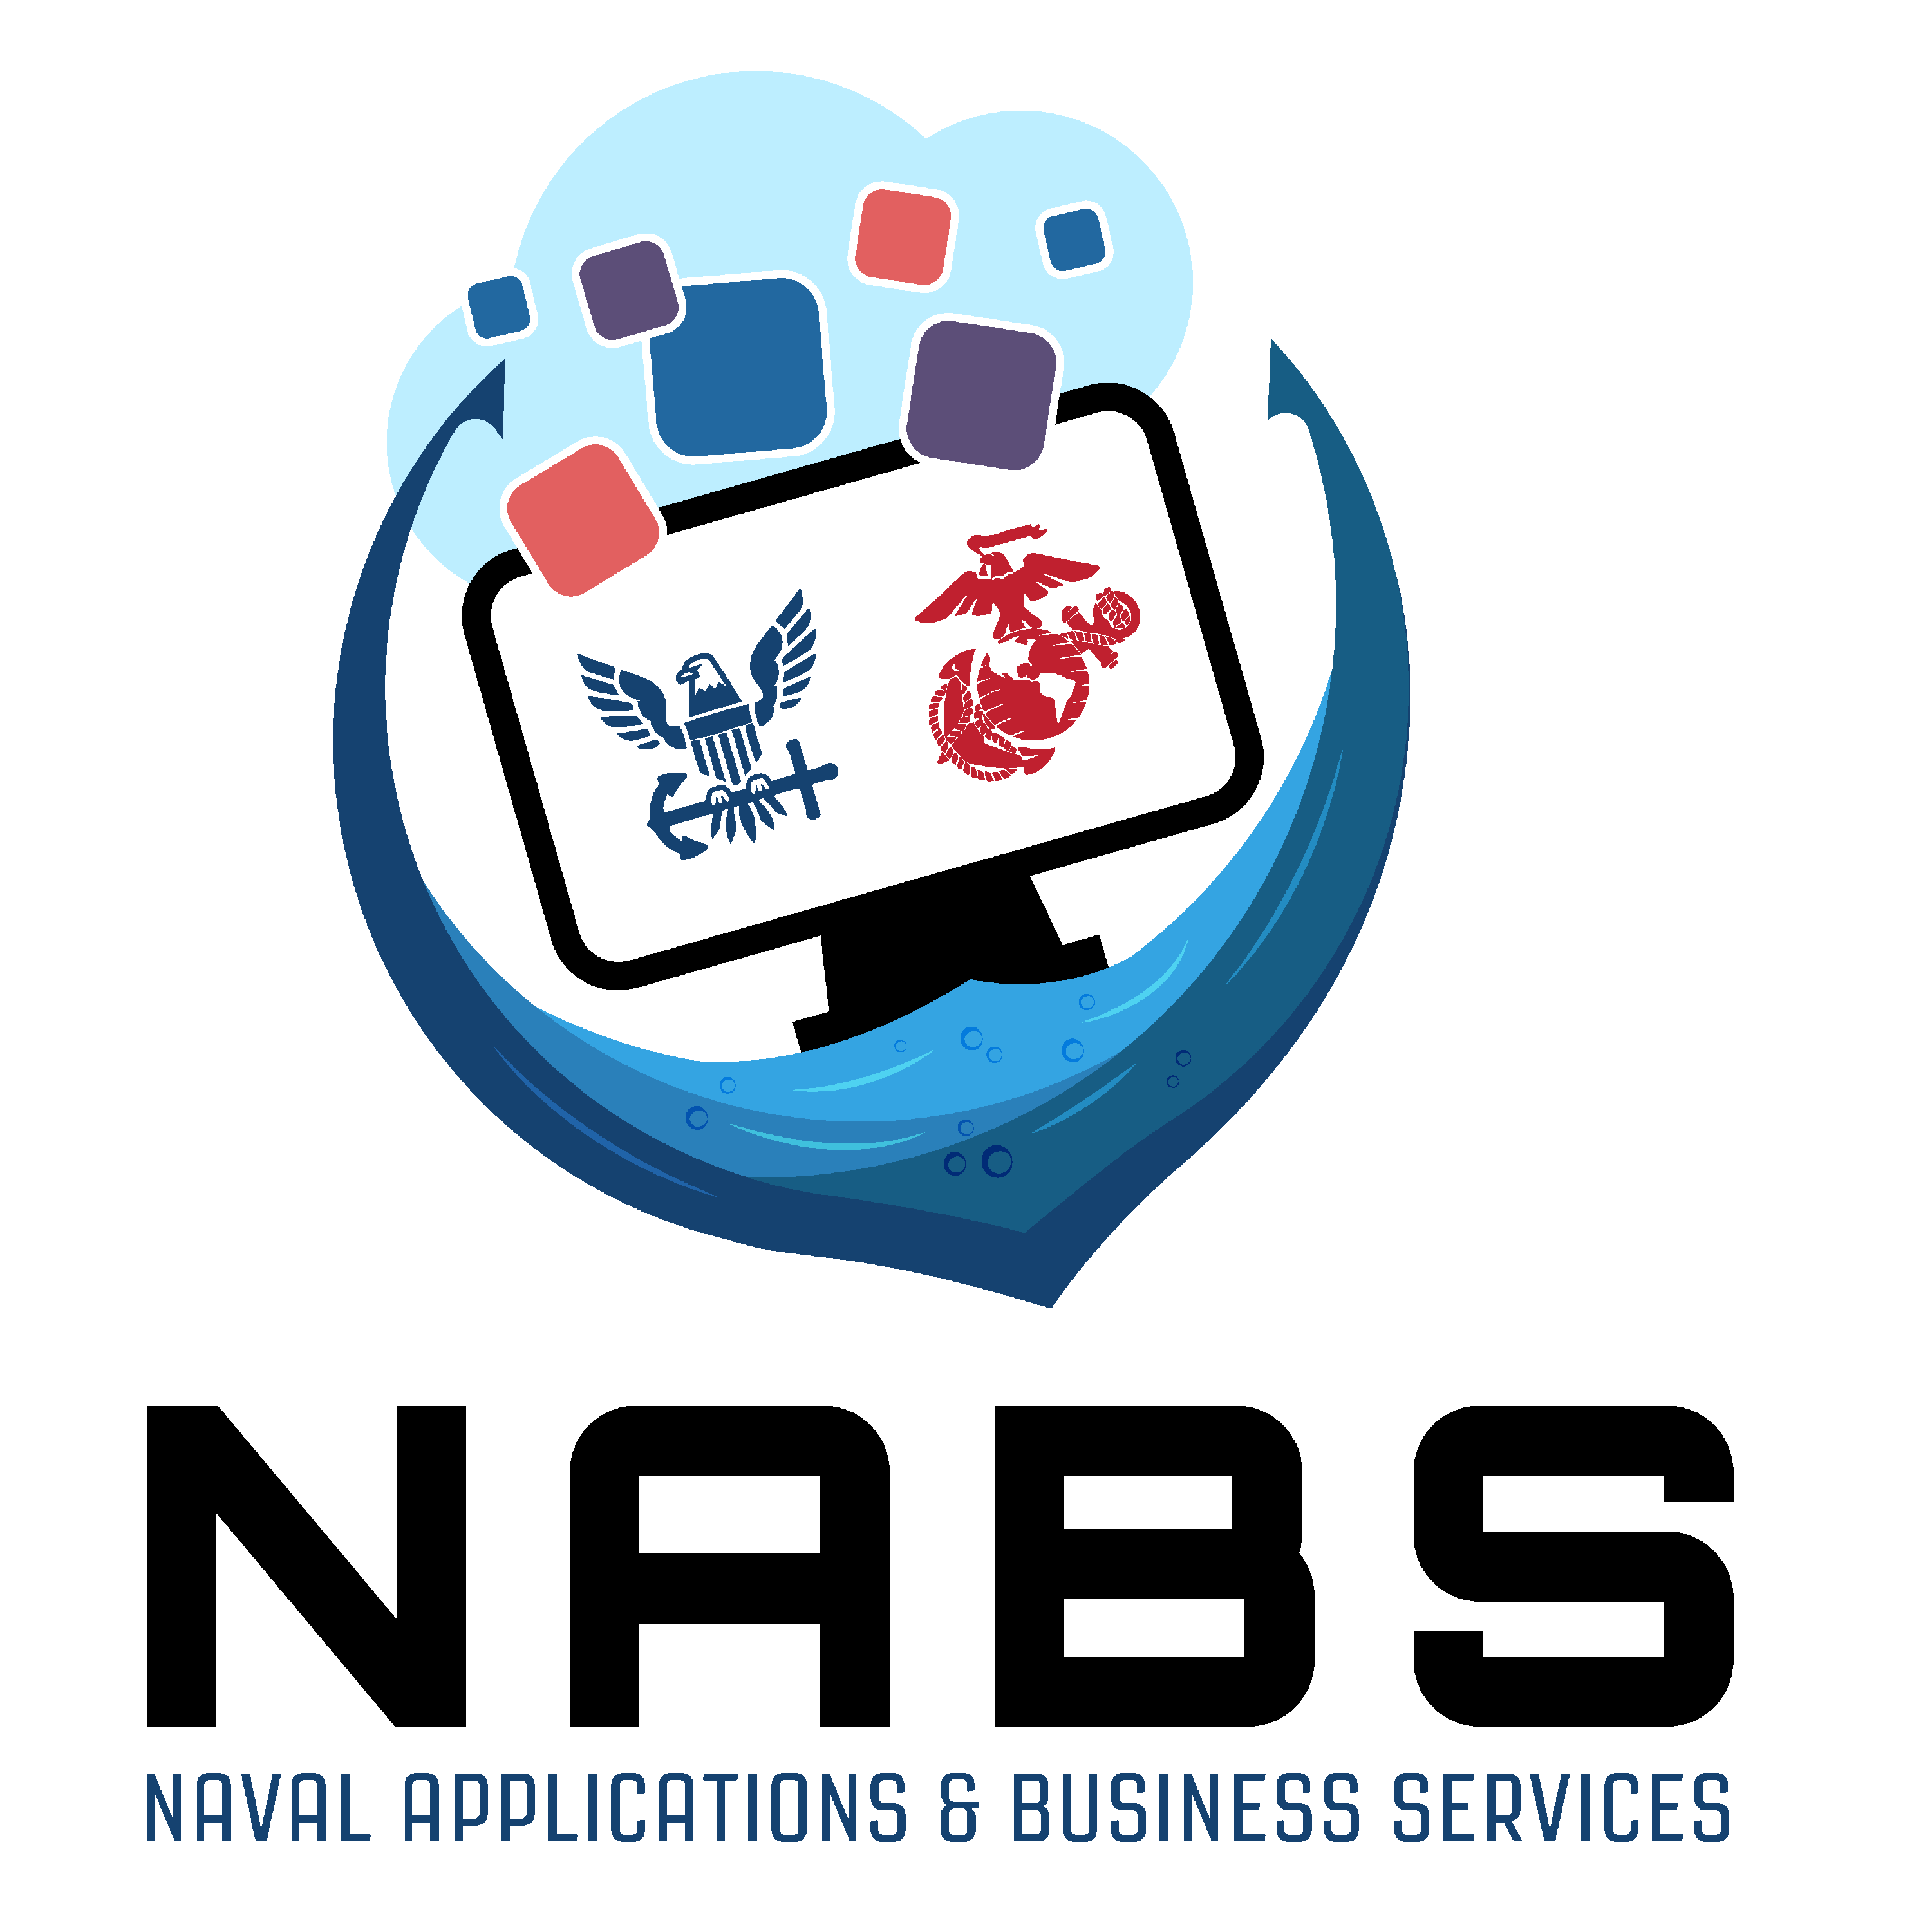 Naval Applications & Business Services Logo